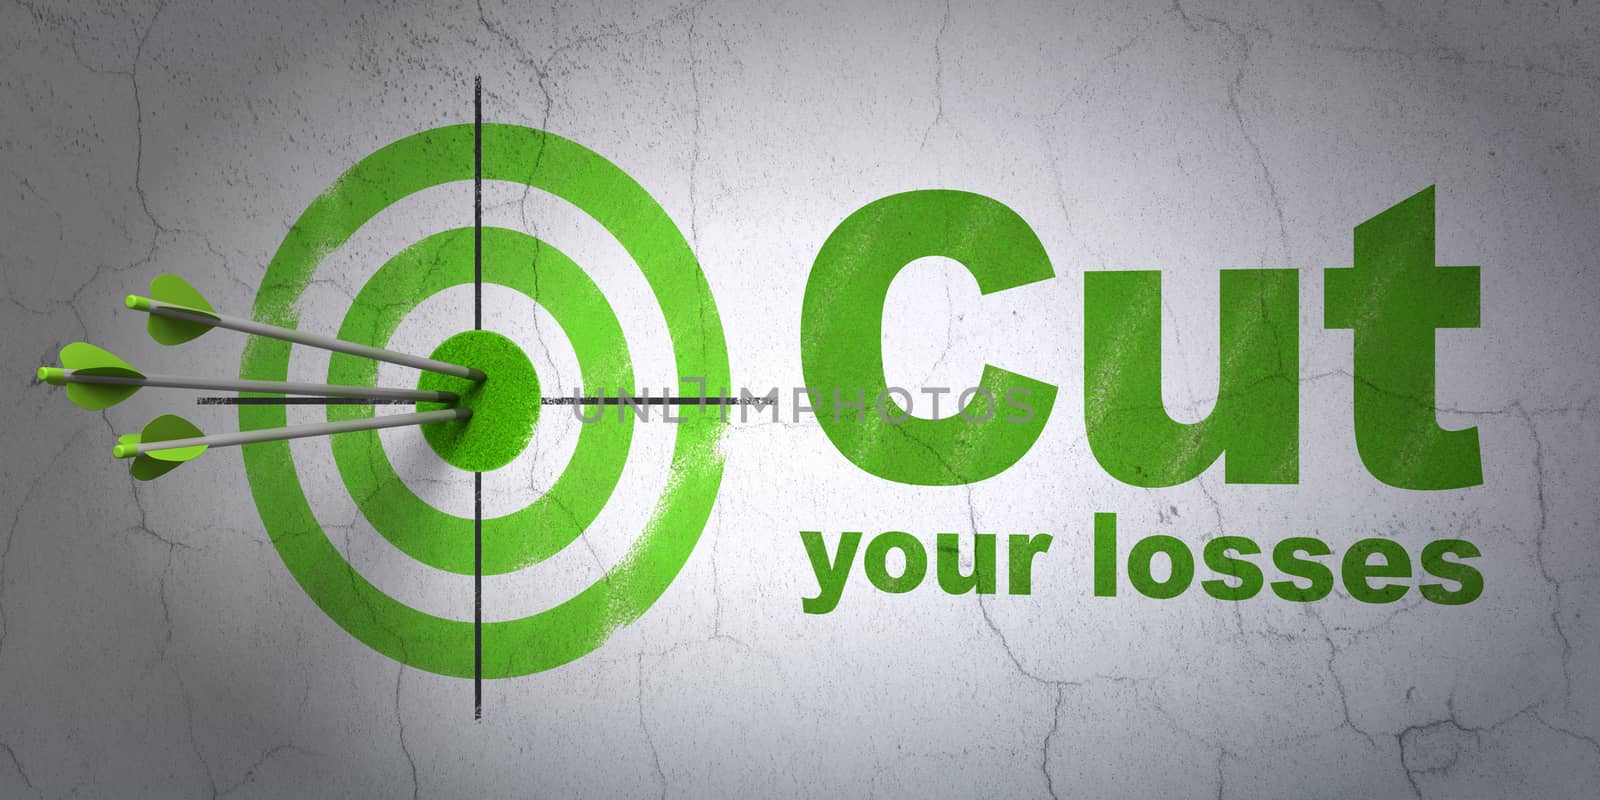 Success finance concept: arrows hitting the center of target, Green Cut Your losses on wall background, 3D rendering